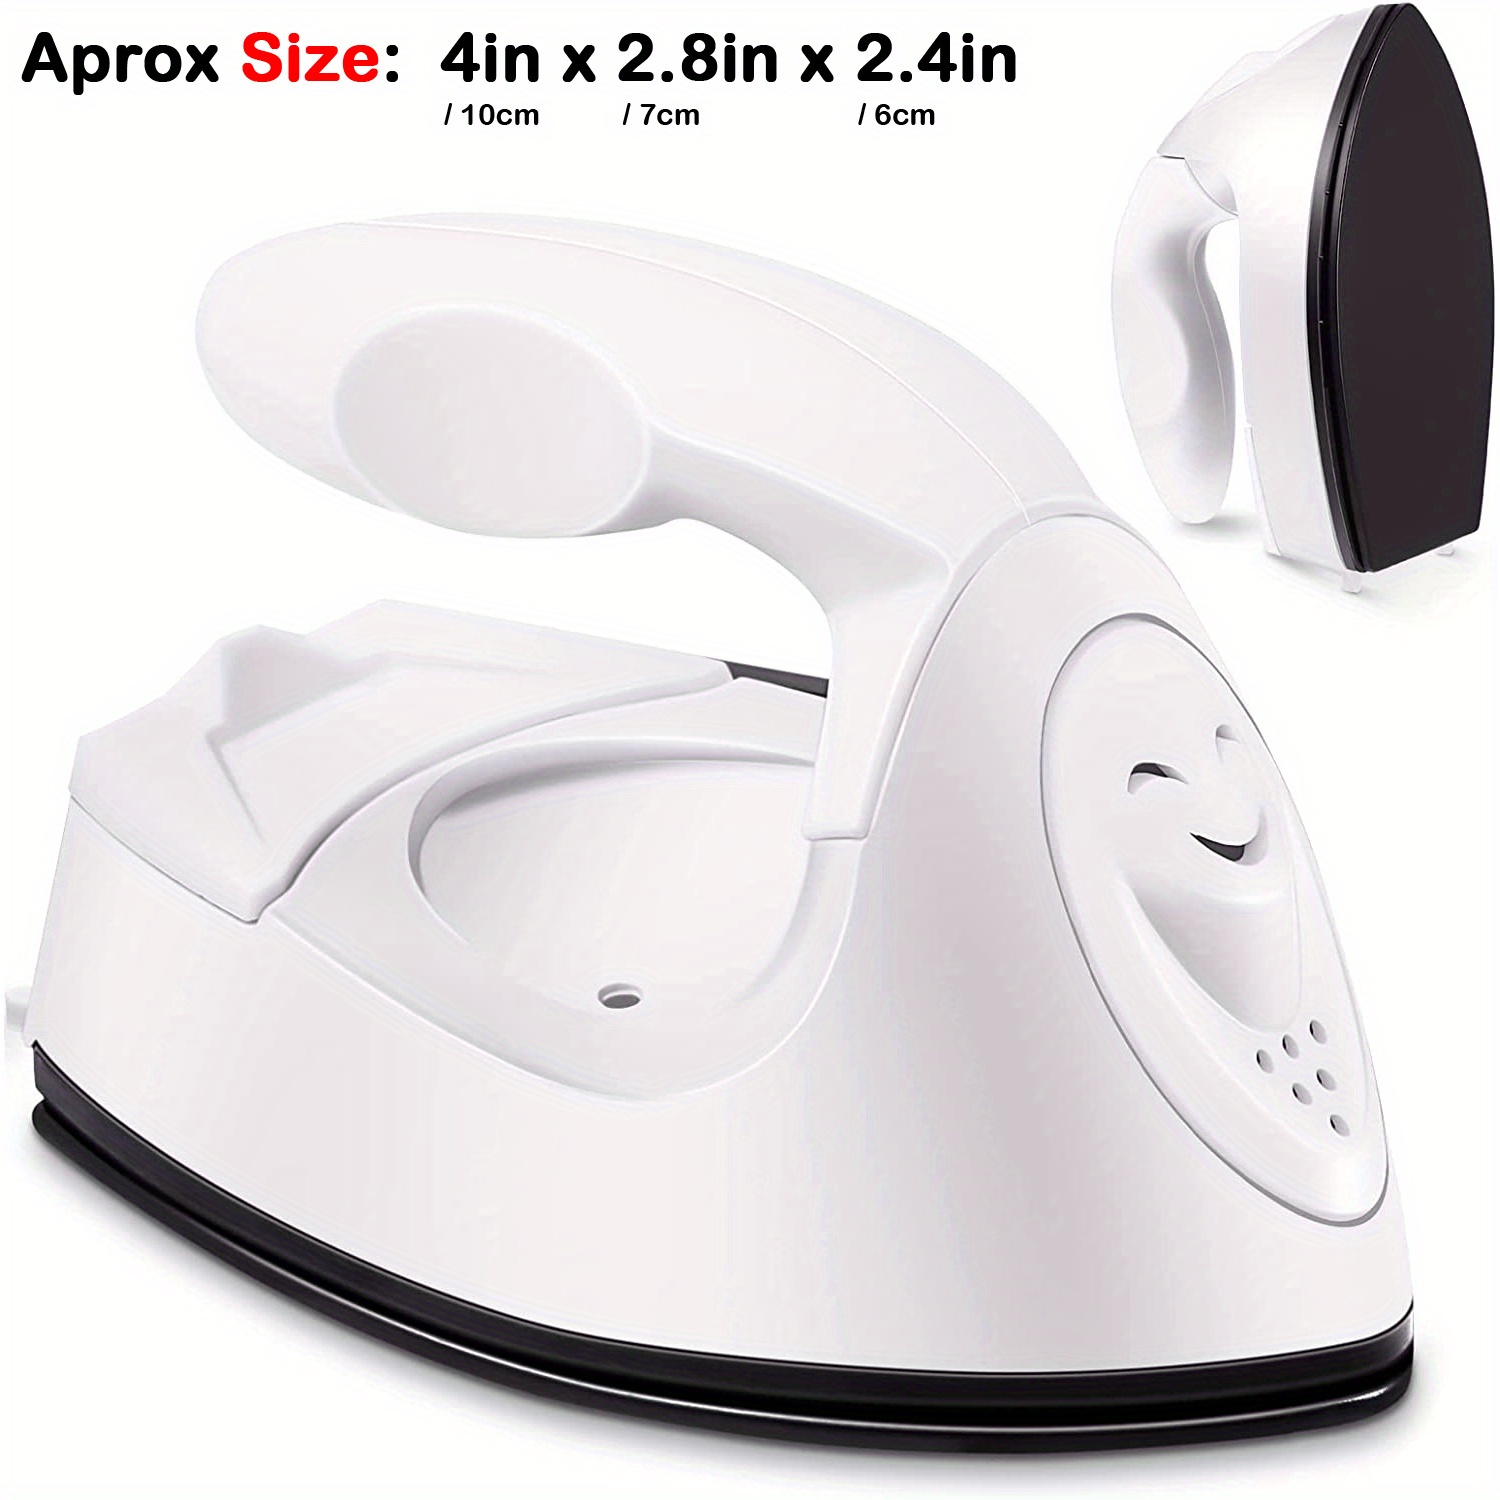  Mini Heat Press Machine for T Shirts Printing Portable DIY Small  Iron Press Machine with 3 Heating Modes for Clothes Bags Hats : Home &  Kitchen